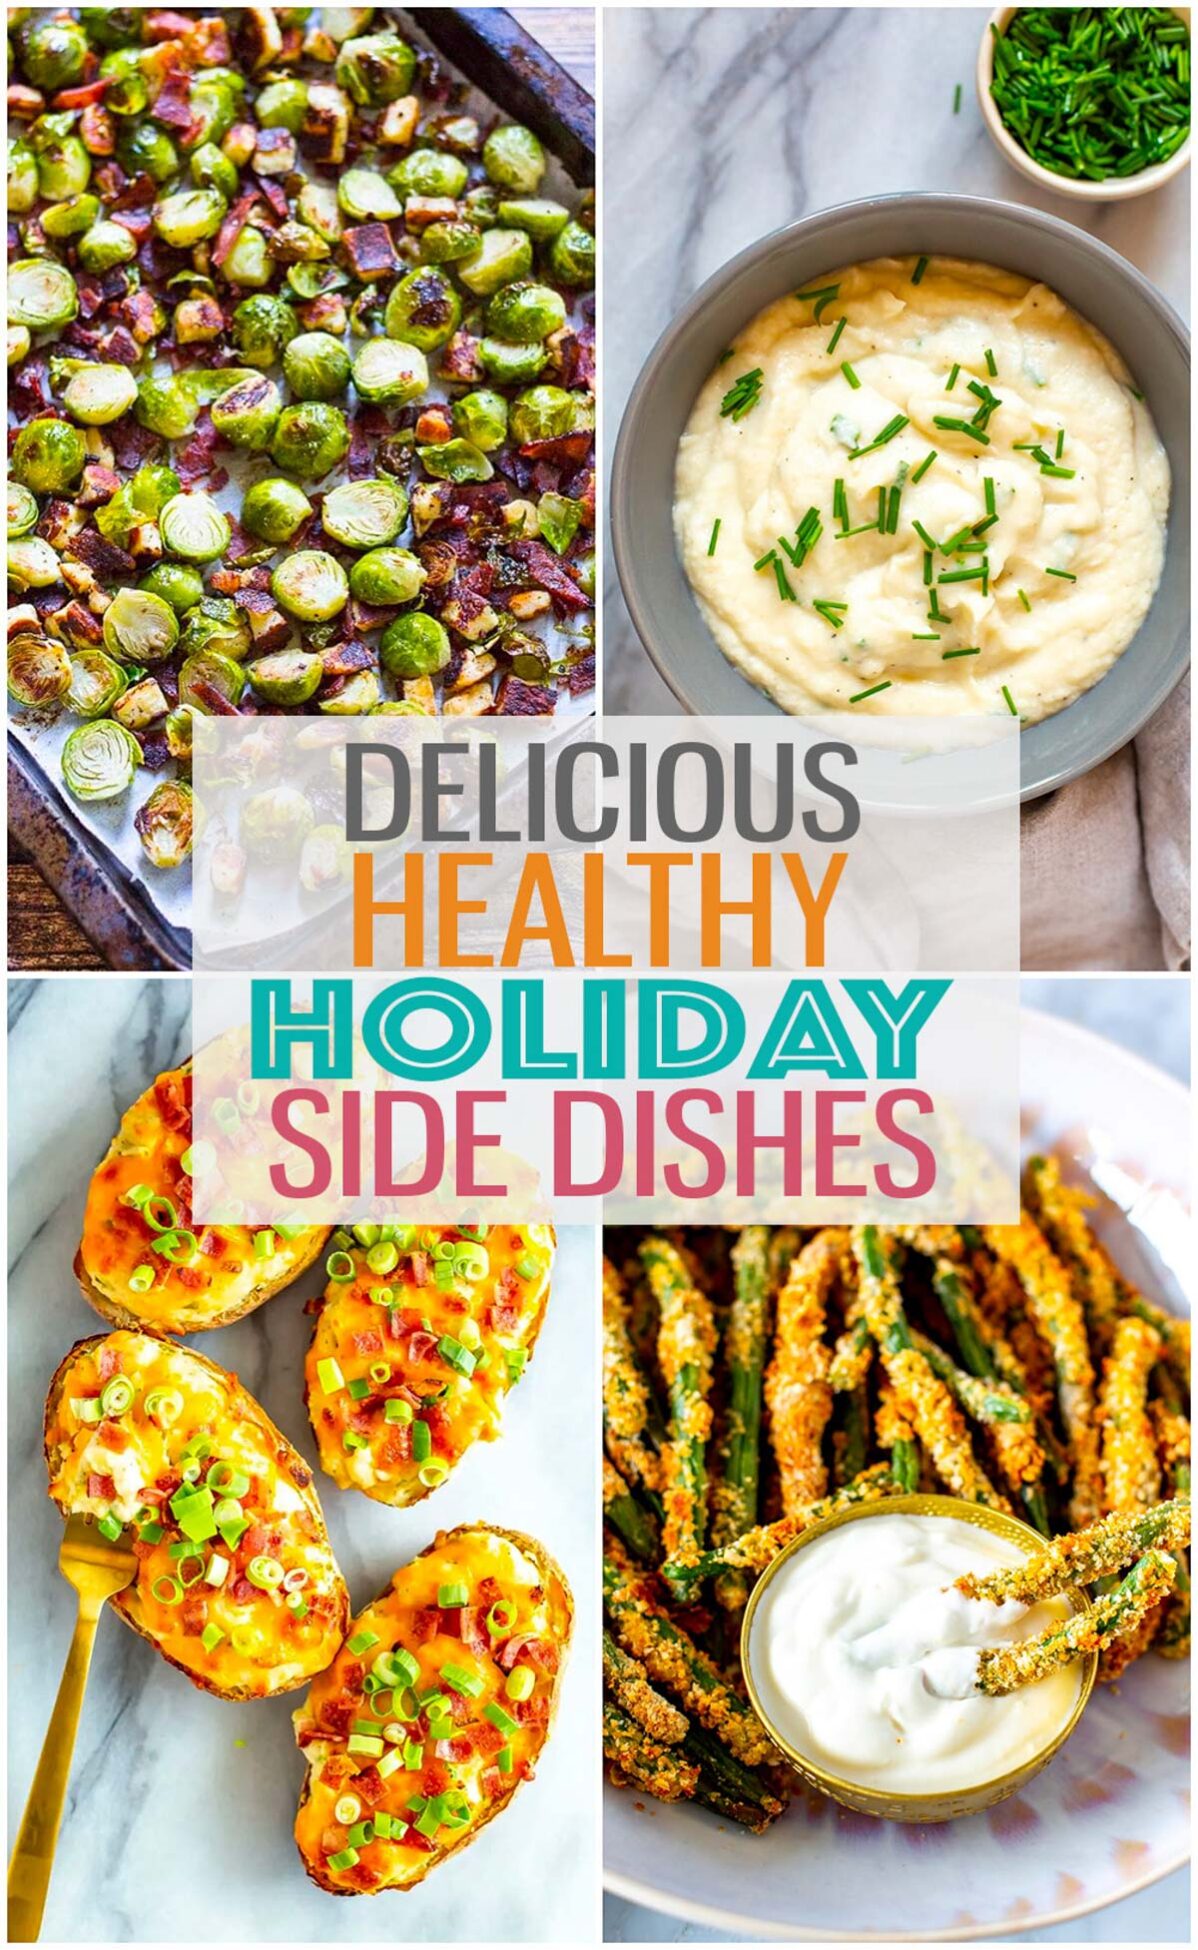 A collage of four different holiday sides with the text "Delicious Healthy Holiday Side Dishes" layered over top.